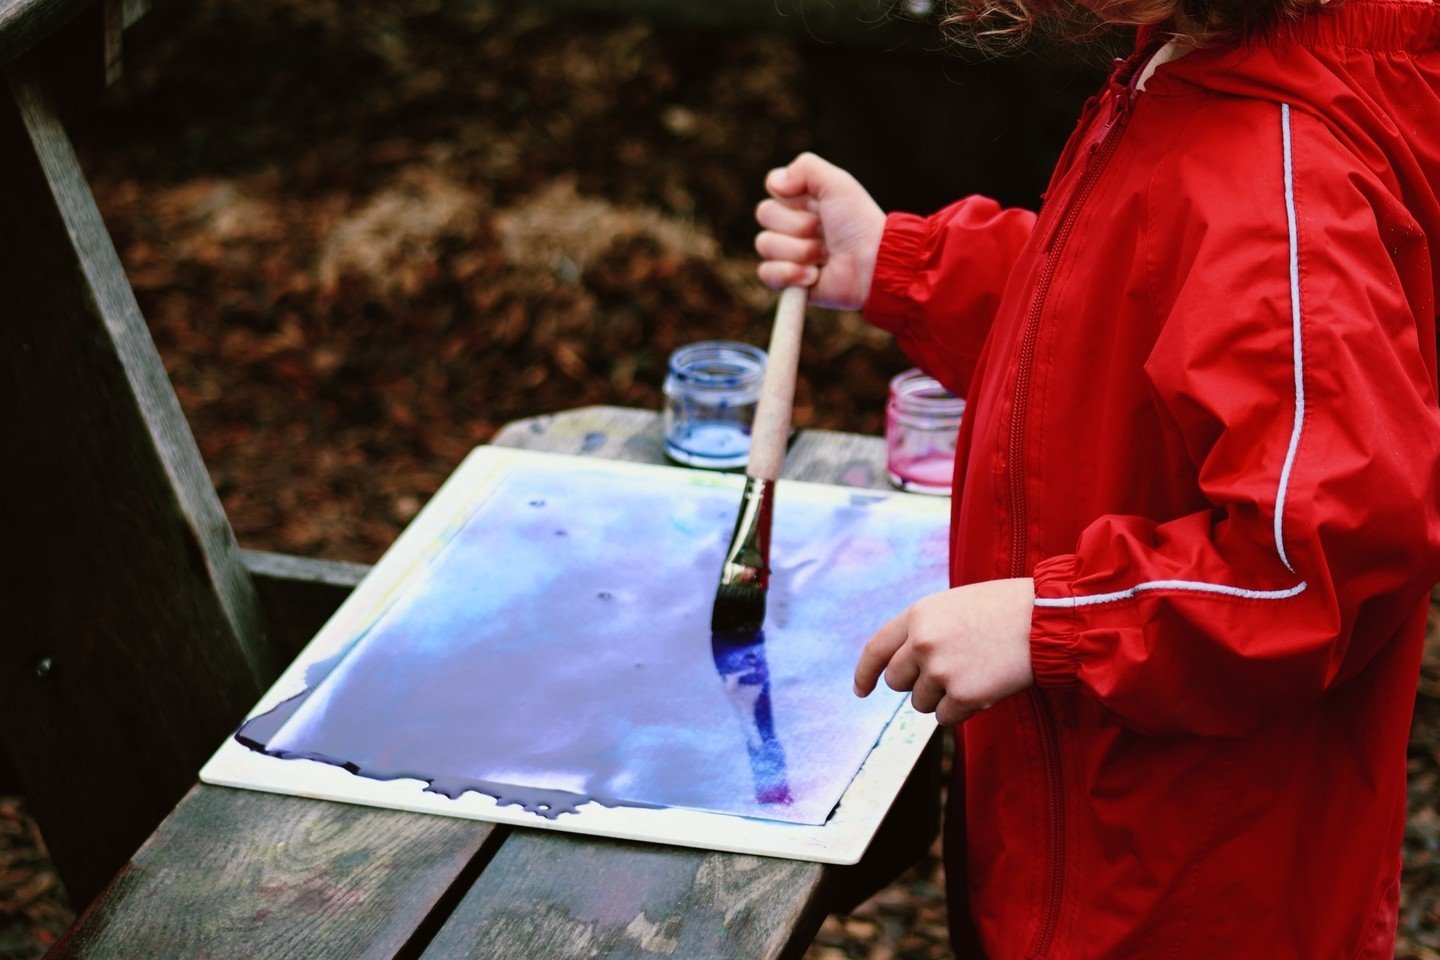 Why not paint outside in the rain? Our EC and elementary students learn wet-on-wet watercolor painting as part of their weekly curriculum. The youngest students begin with color studies, often matching the feeling or sense of a story they've just hea